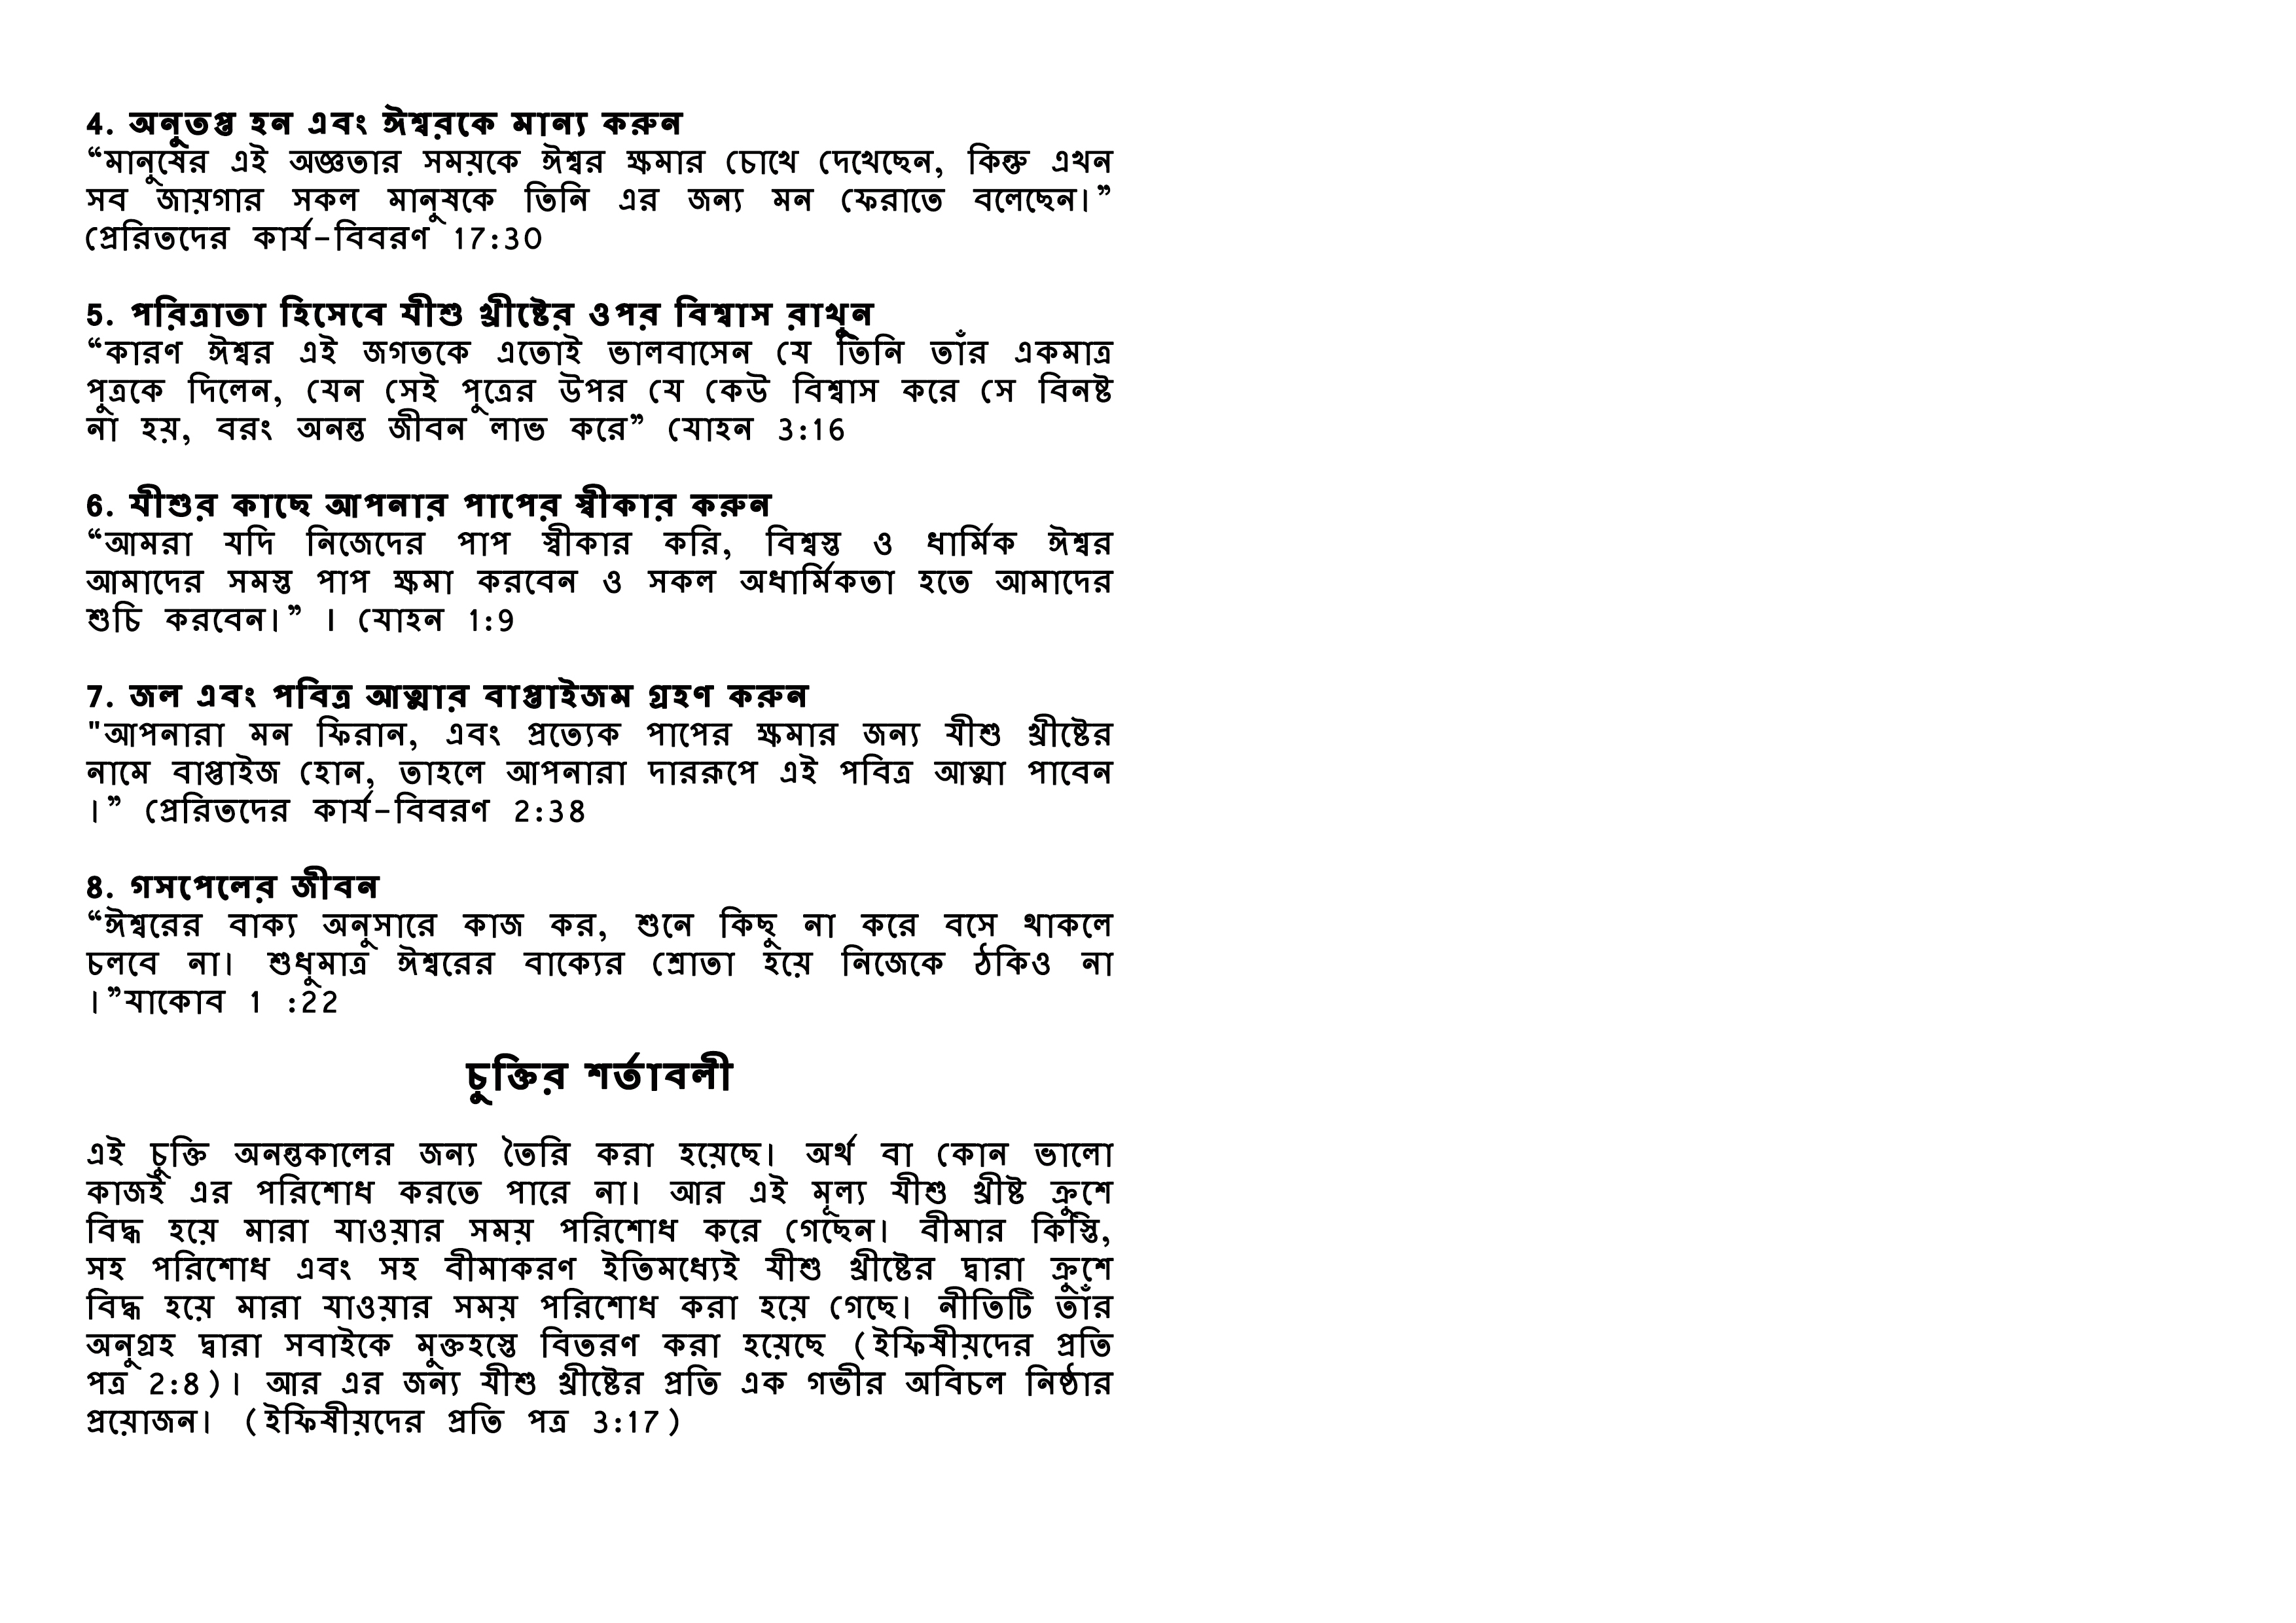 Free-all-Inclusive-insurance-policy_page2-bengali1